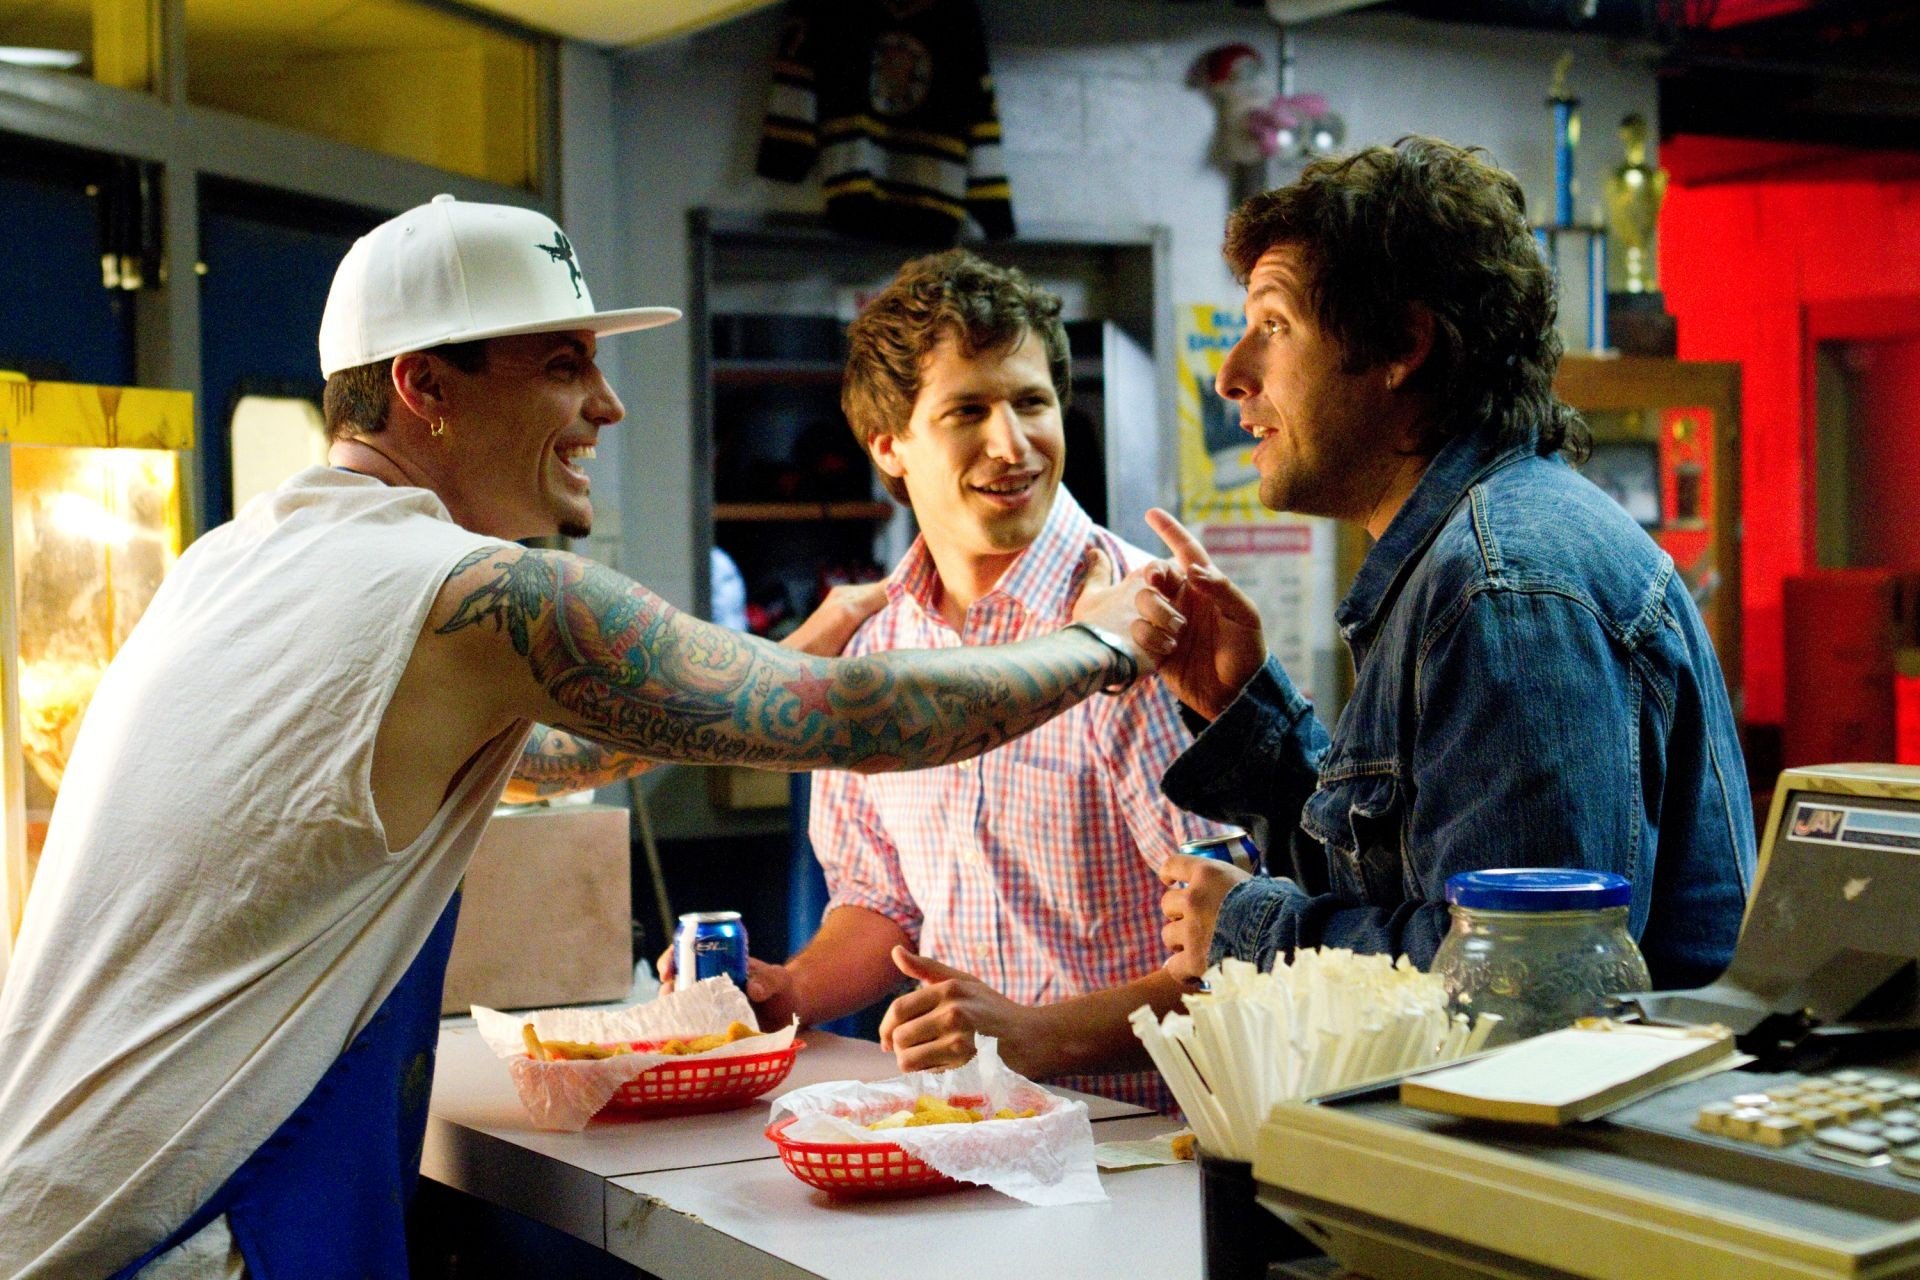 Vanilla Ice, Andy Samberg and Adam Sandler in Columbia Pictures' That's My Boy (2012). Photo credit by Photo credit by Tony Rivetti.